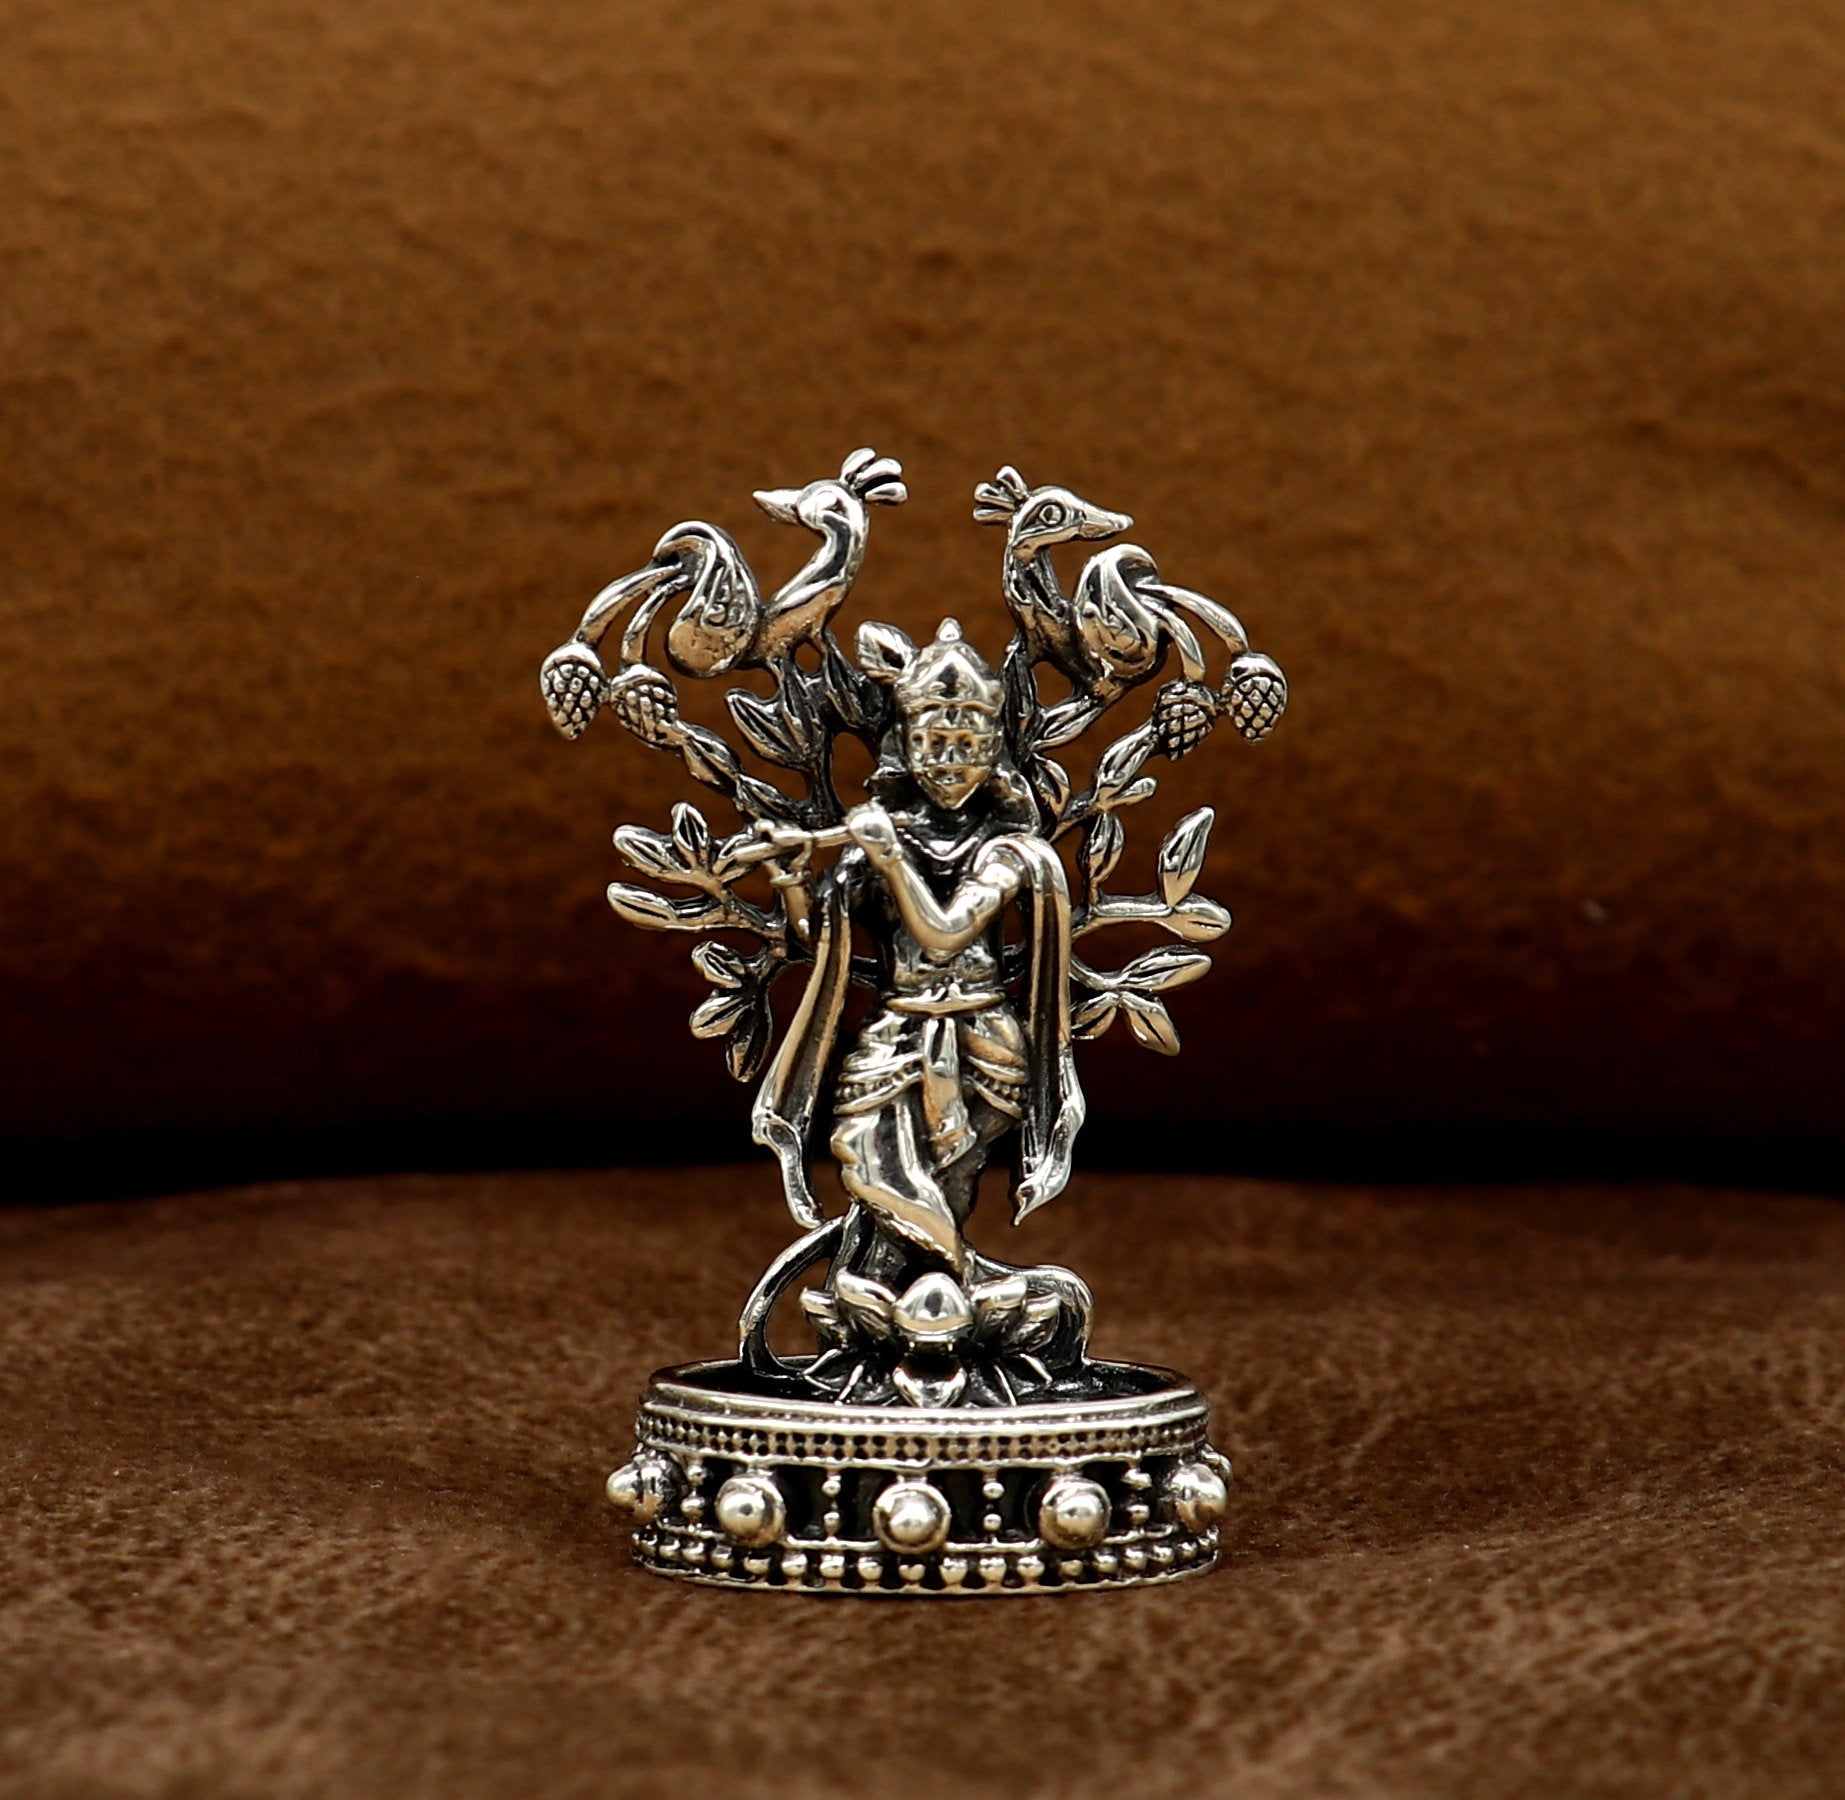 925 Sterling silver handmade antique design Idols Lord Krishna with flute standing Statue figurine, puja articles decorative gift art17 - TRIBAL ORNAMENTS